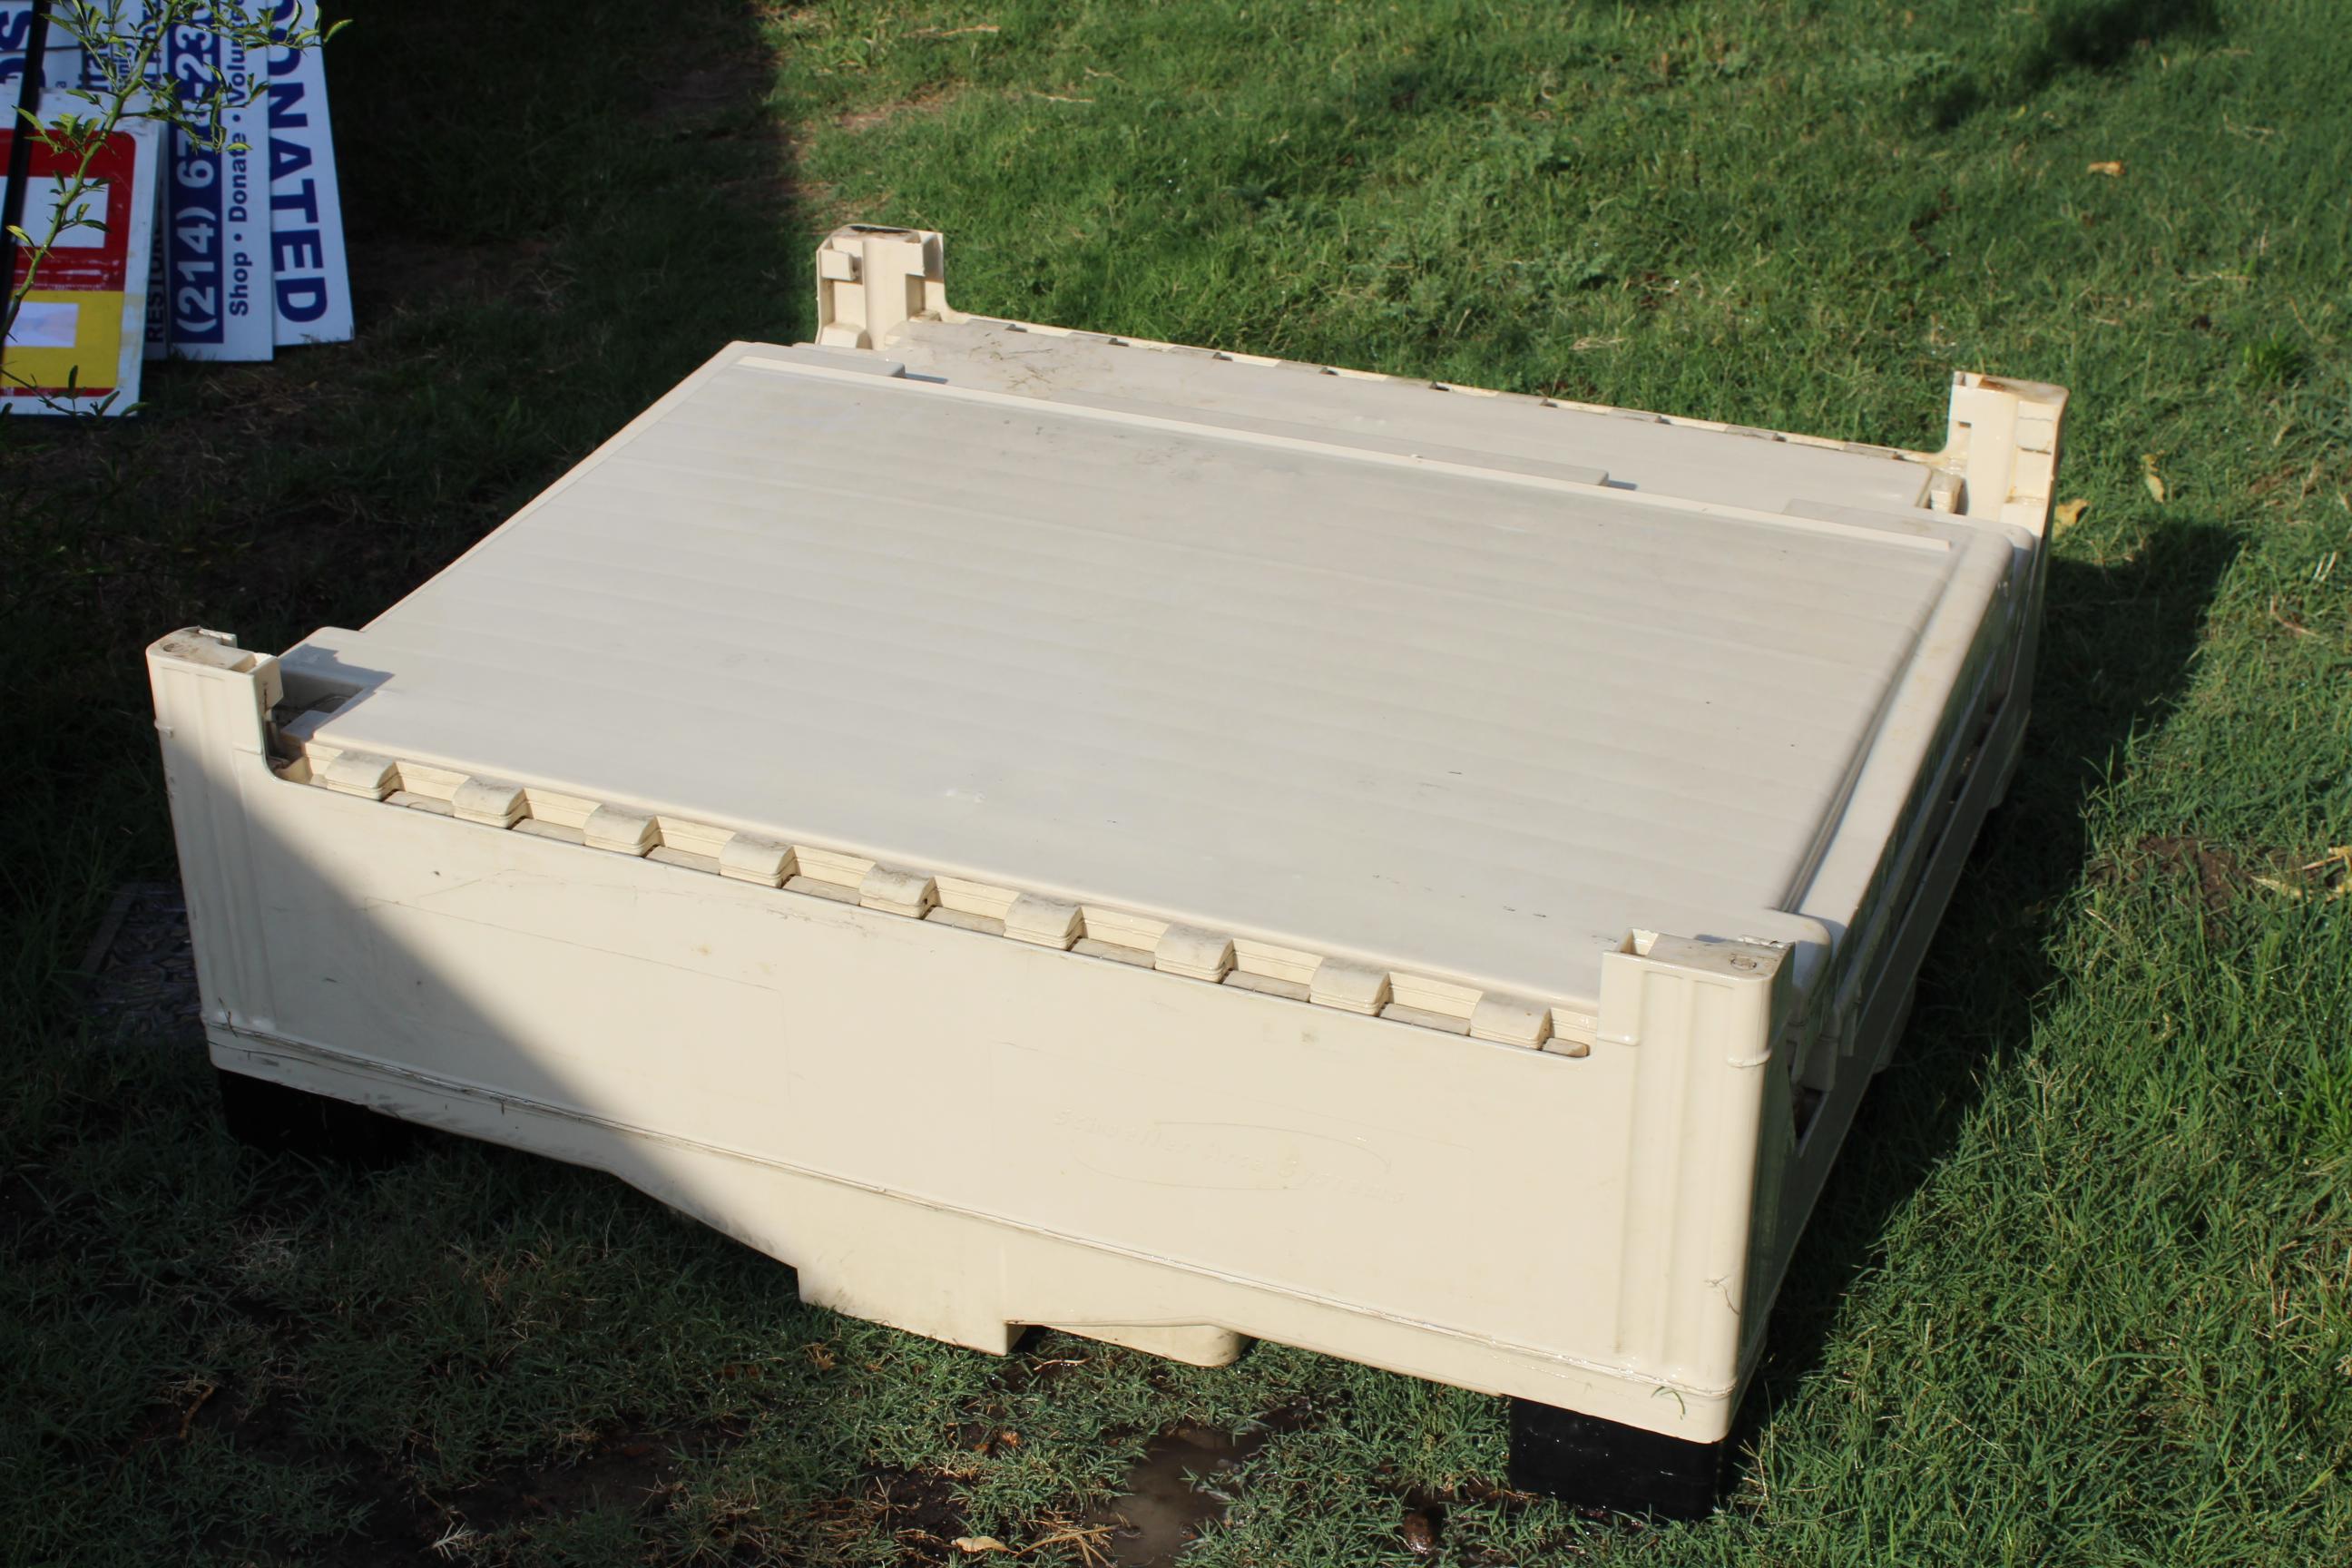 LARGE PLASTIC GAYLORD WITH 2 HINGED SIDES AND LID - APPROX. 48" X 48" X 48"